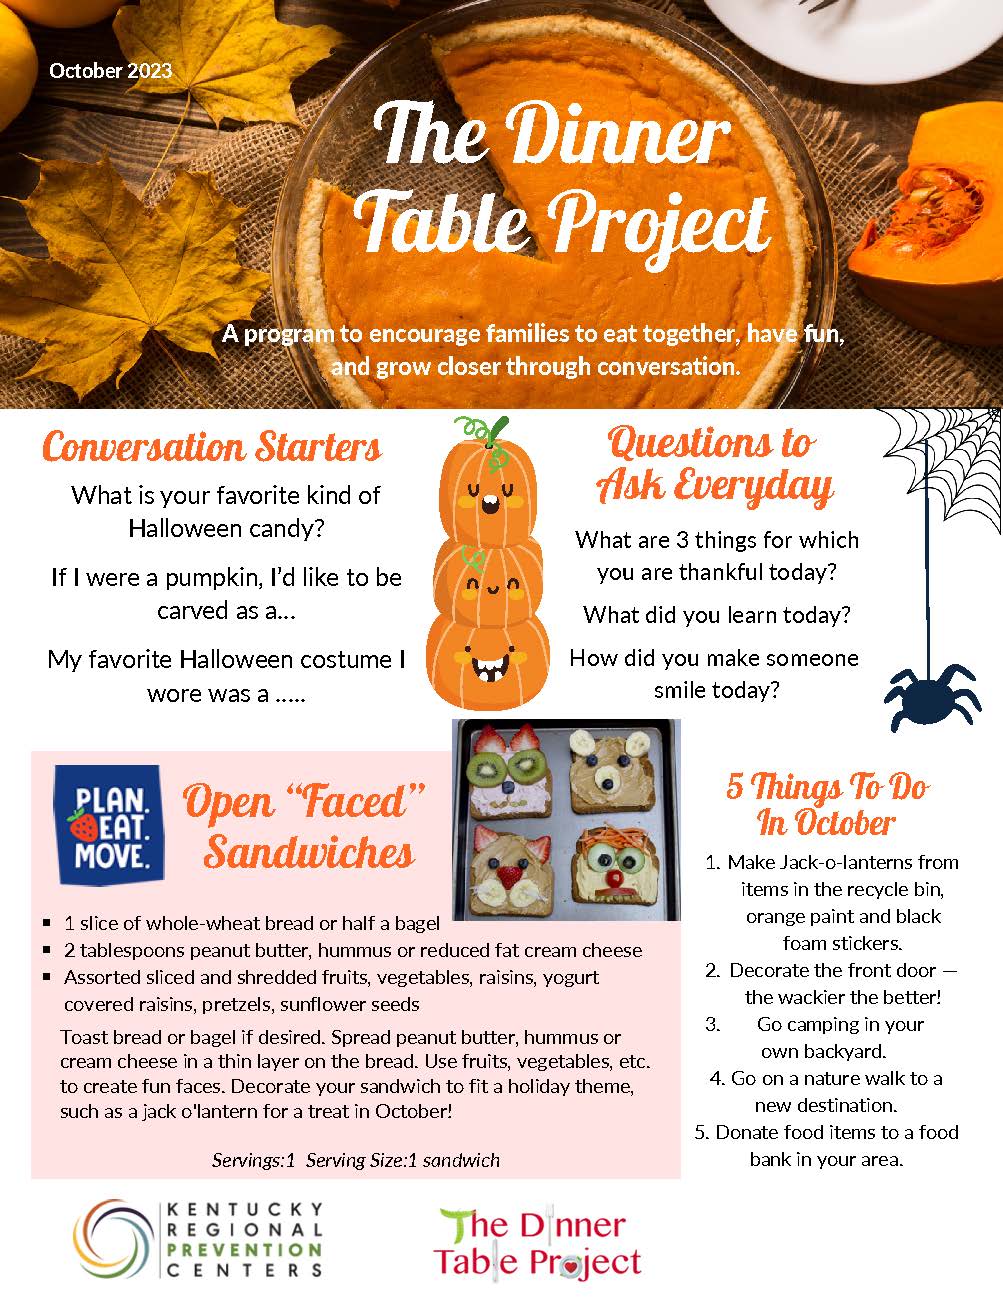 October 2023 The Dinner Table Project Newsletter